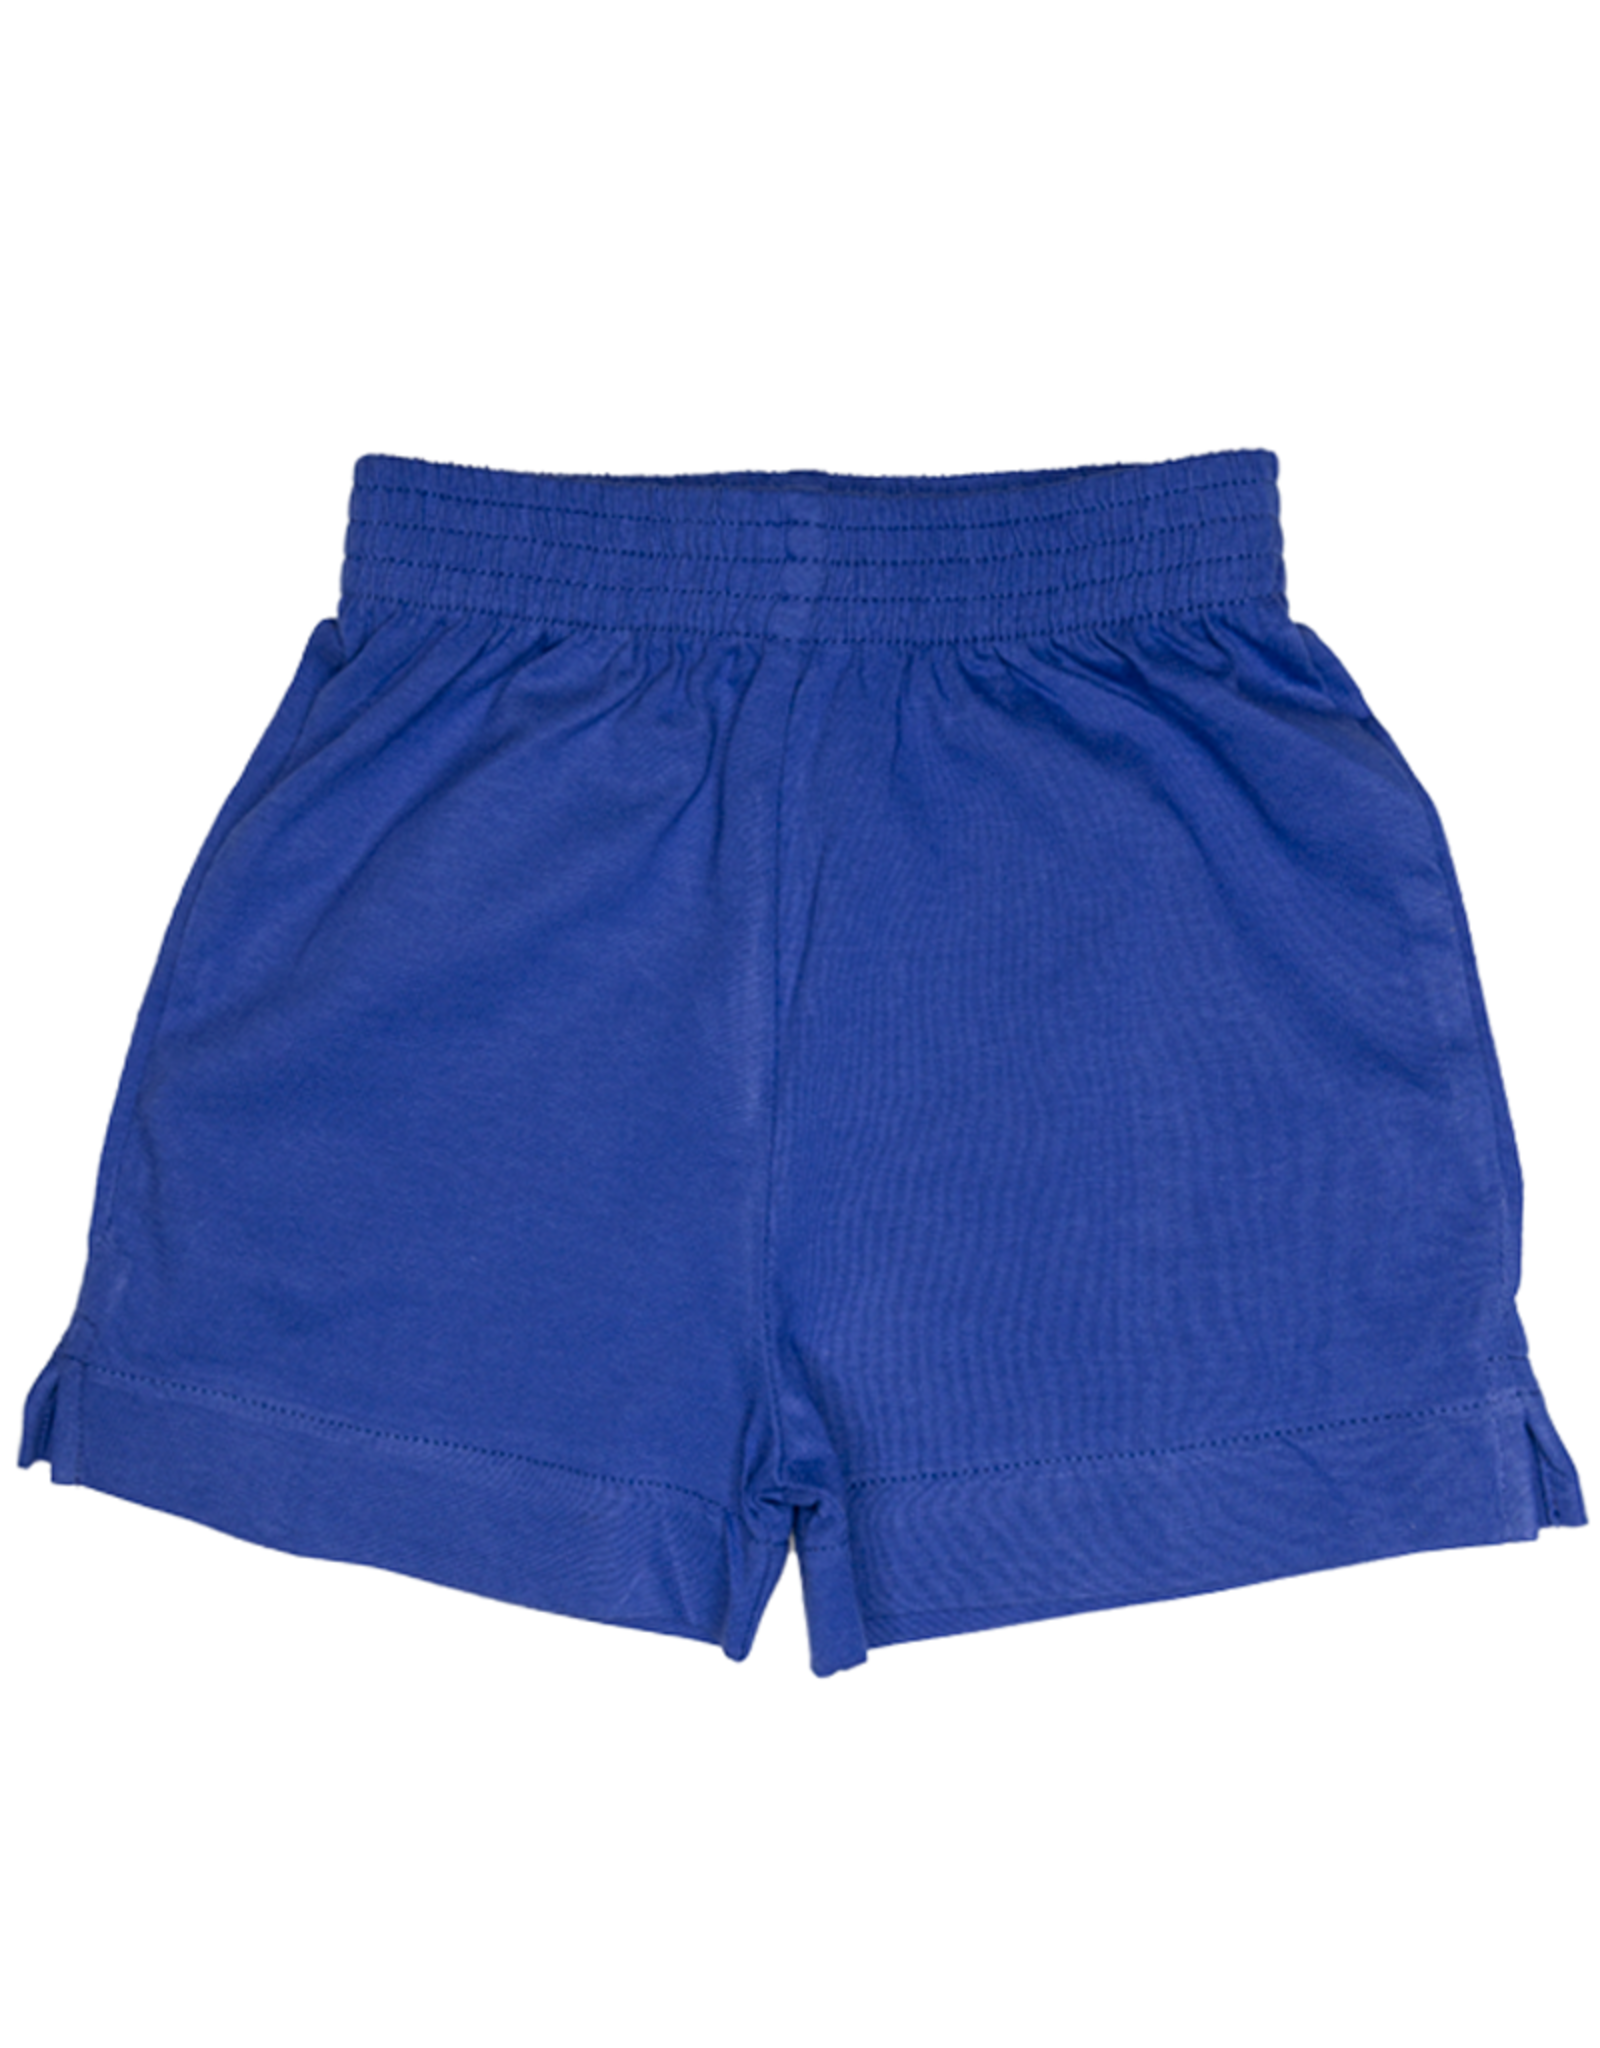 Luigi Jersey Knit Short Royal - Spoiled Sweet Boutique - Spoiled Sweet ...